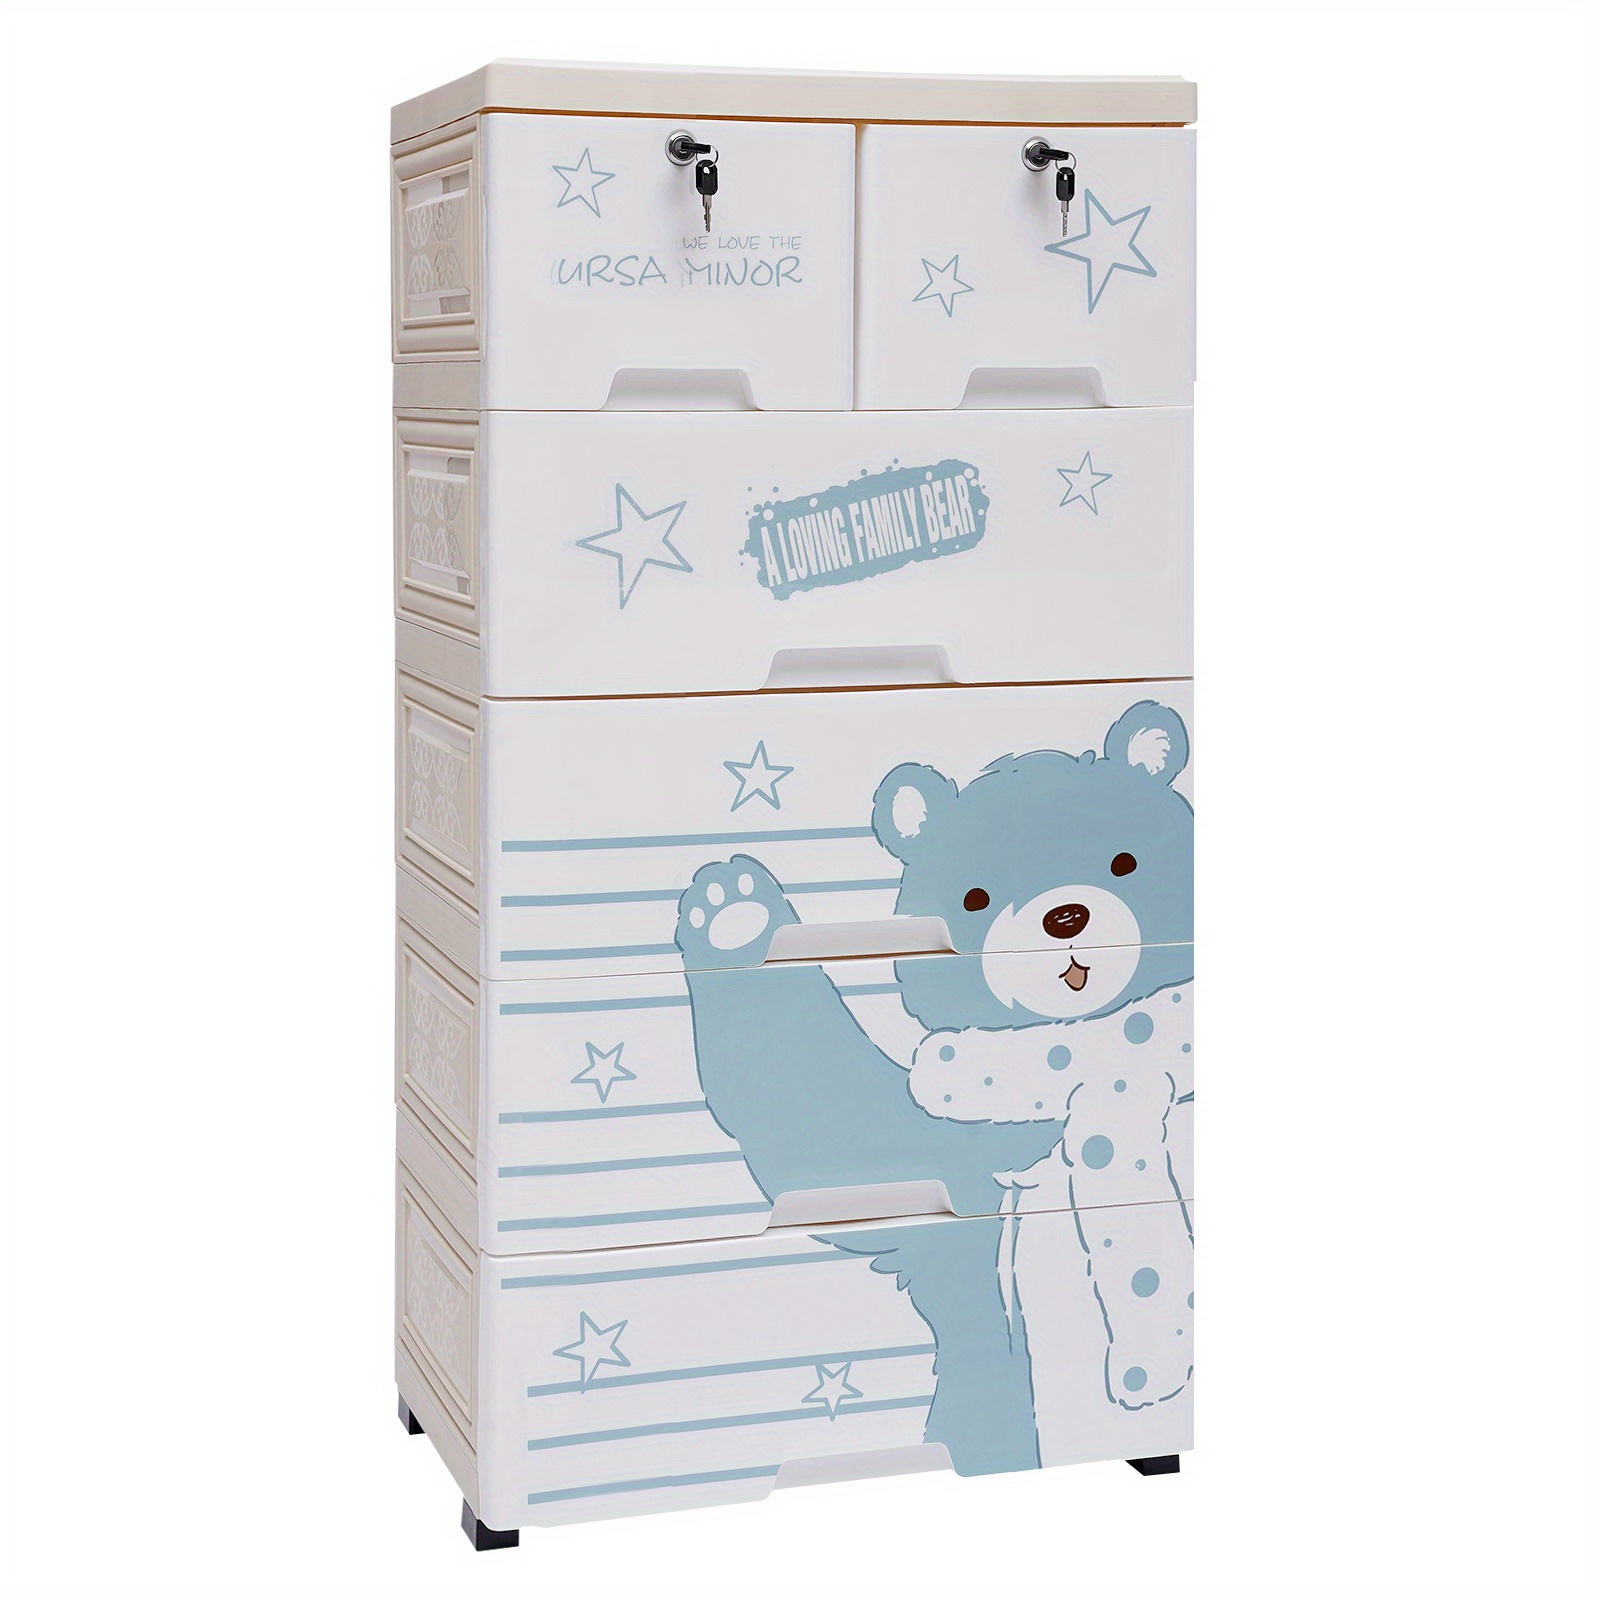 

Plastic Drawers Dresser For Bedroom Locked Storage Cabinet With 6 Drawers Craft Organizers And Storage For Clothes, Towels Chest Of Drawers For Playroom, 19.7’’ W X 13.8’’ D X 40’’ H (polar Bear)